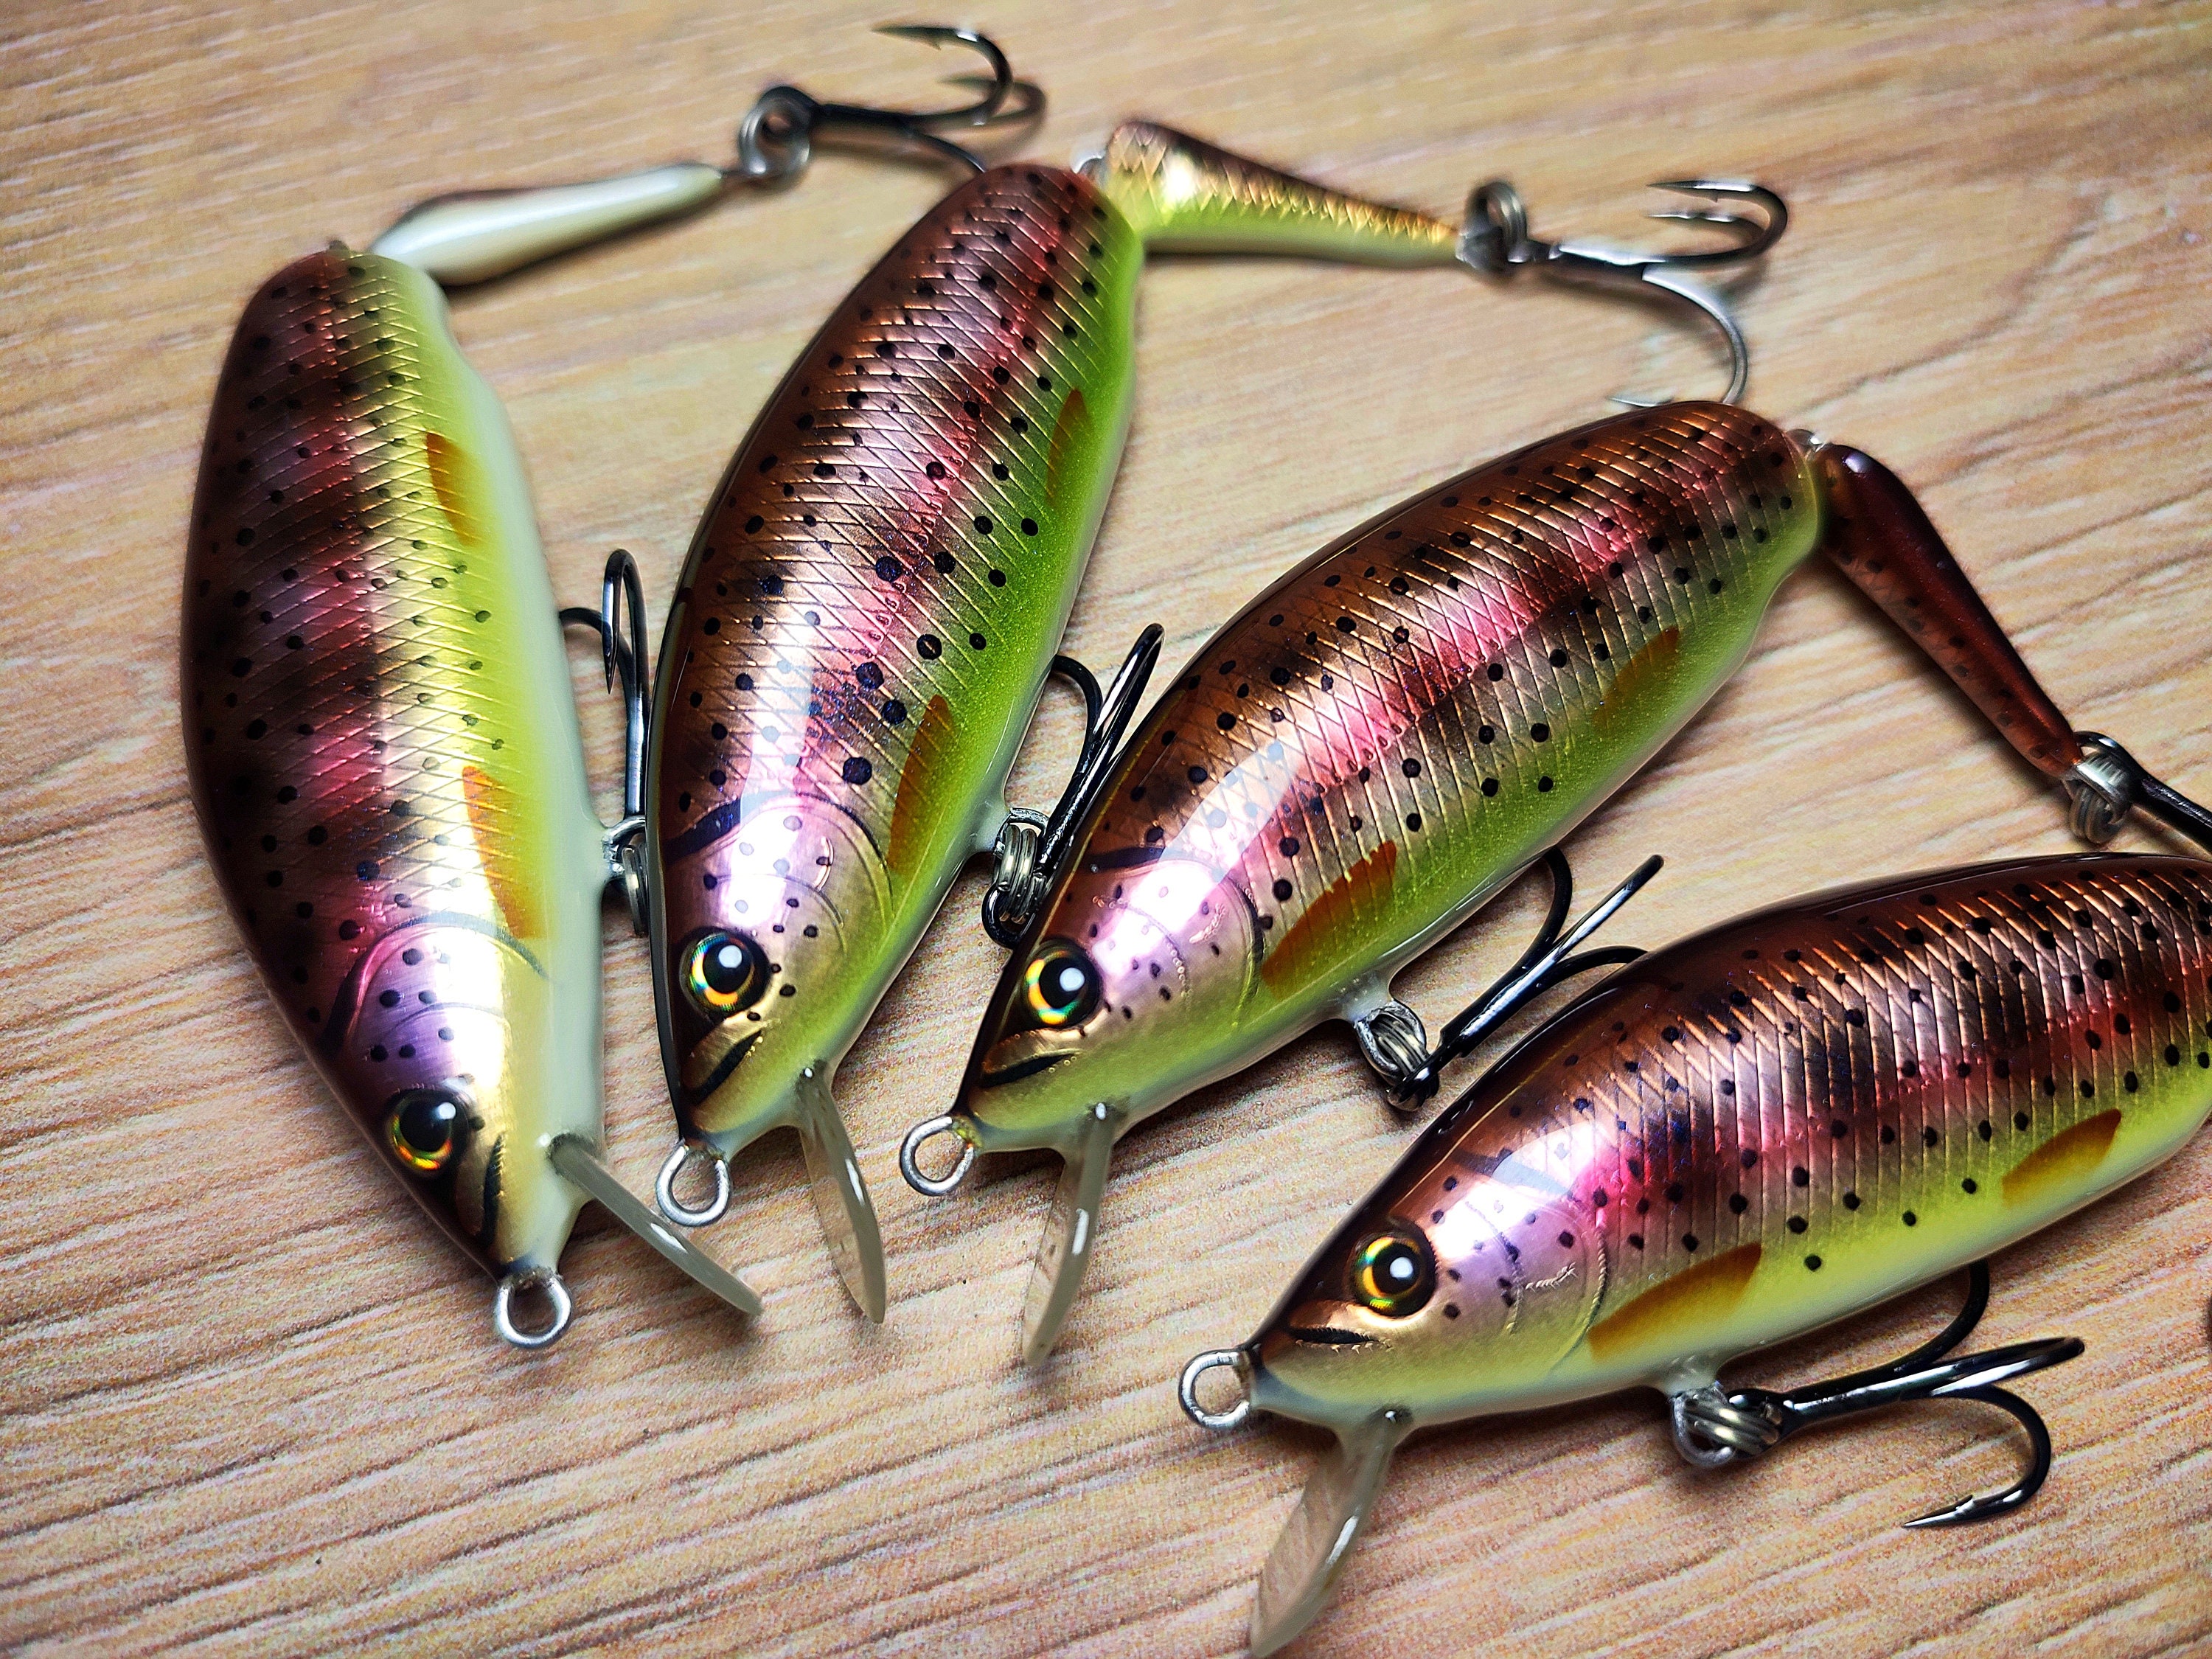 Veles handcrafted lures 80mm-6.5gr floating,two piece lure.  Trout,salmon,bass,pike,muskie fishing lure. Made from balsa wood. Treble  hooks